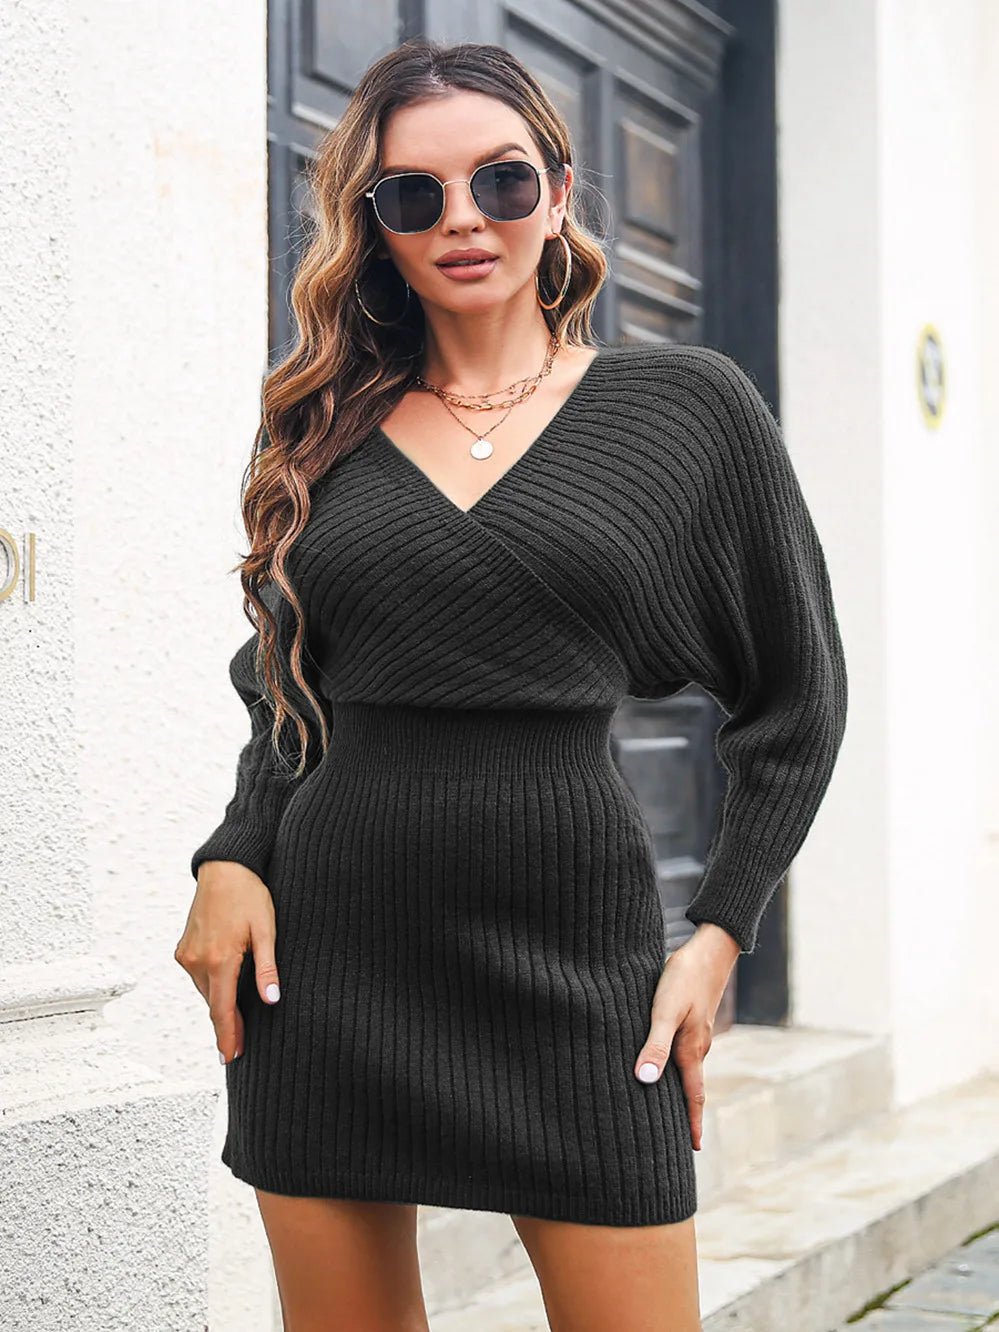 Casual V-neck dress, doll sleeves, solid color, knitted at the hips